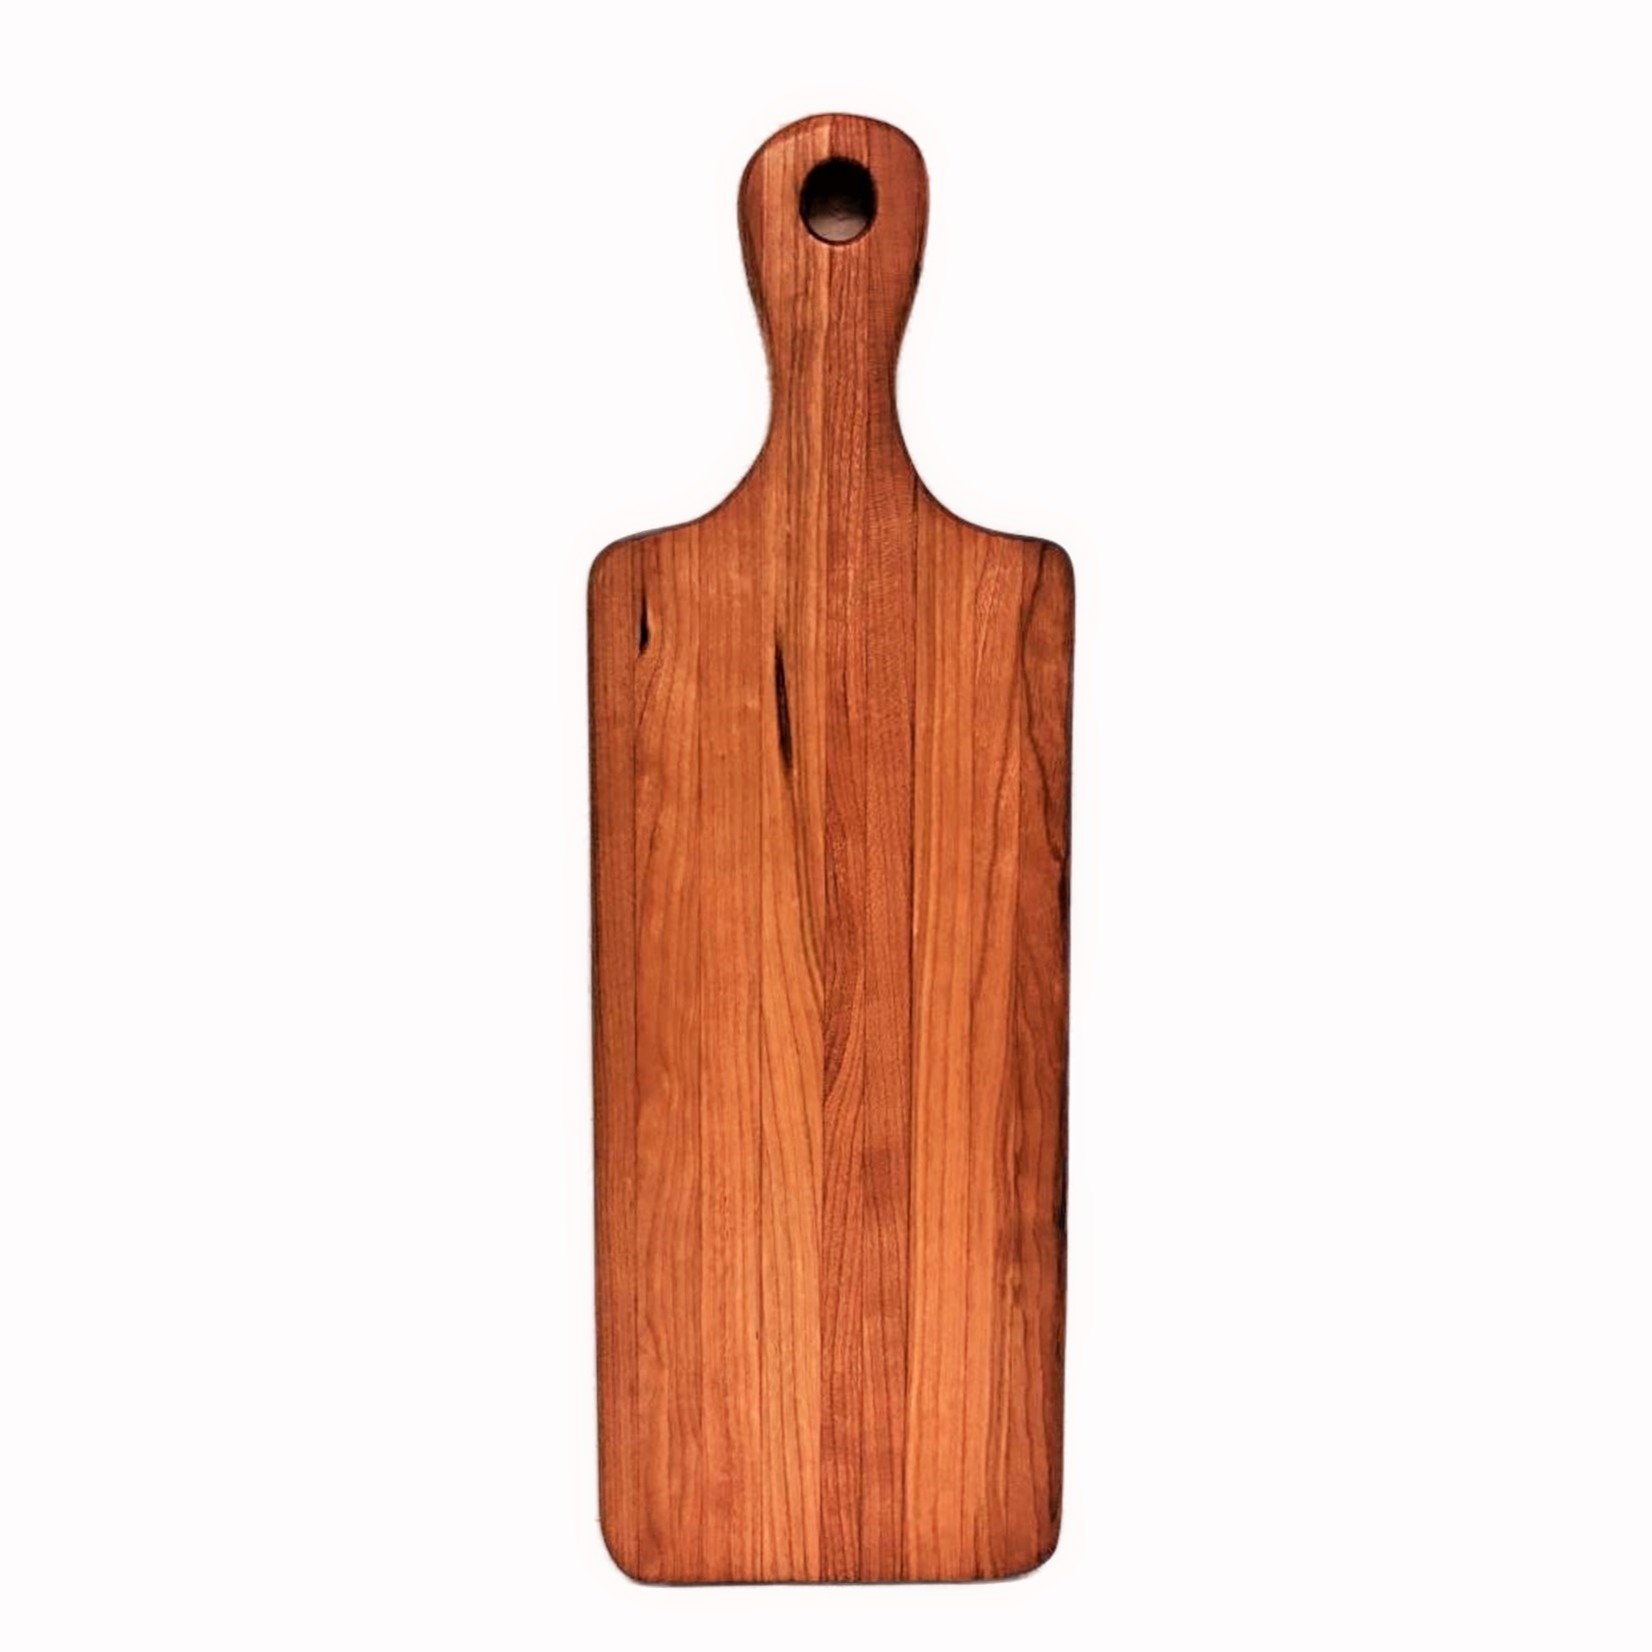 Irregular Rubber Wood Bread Board with Handle Wooden Kitchen